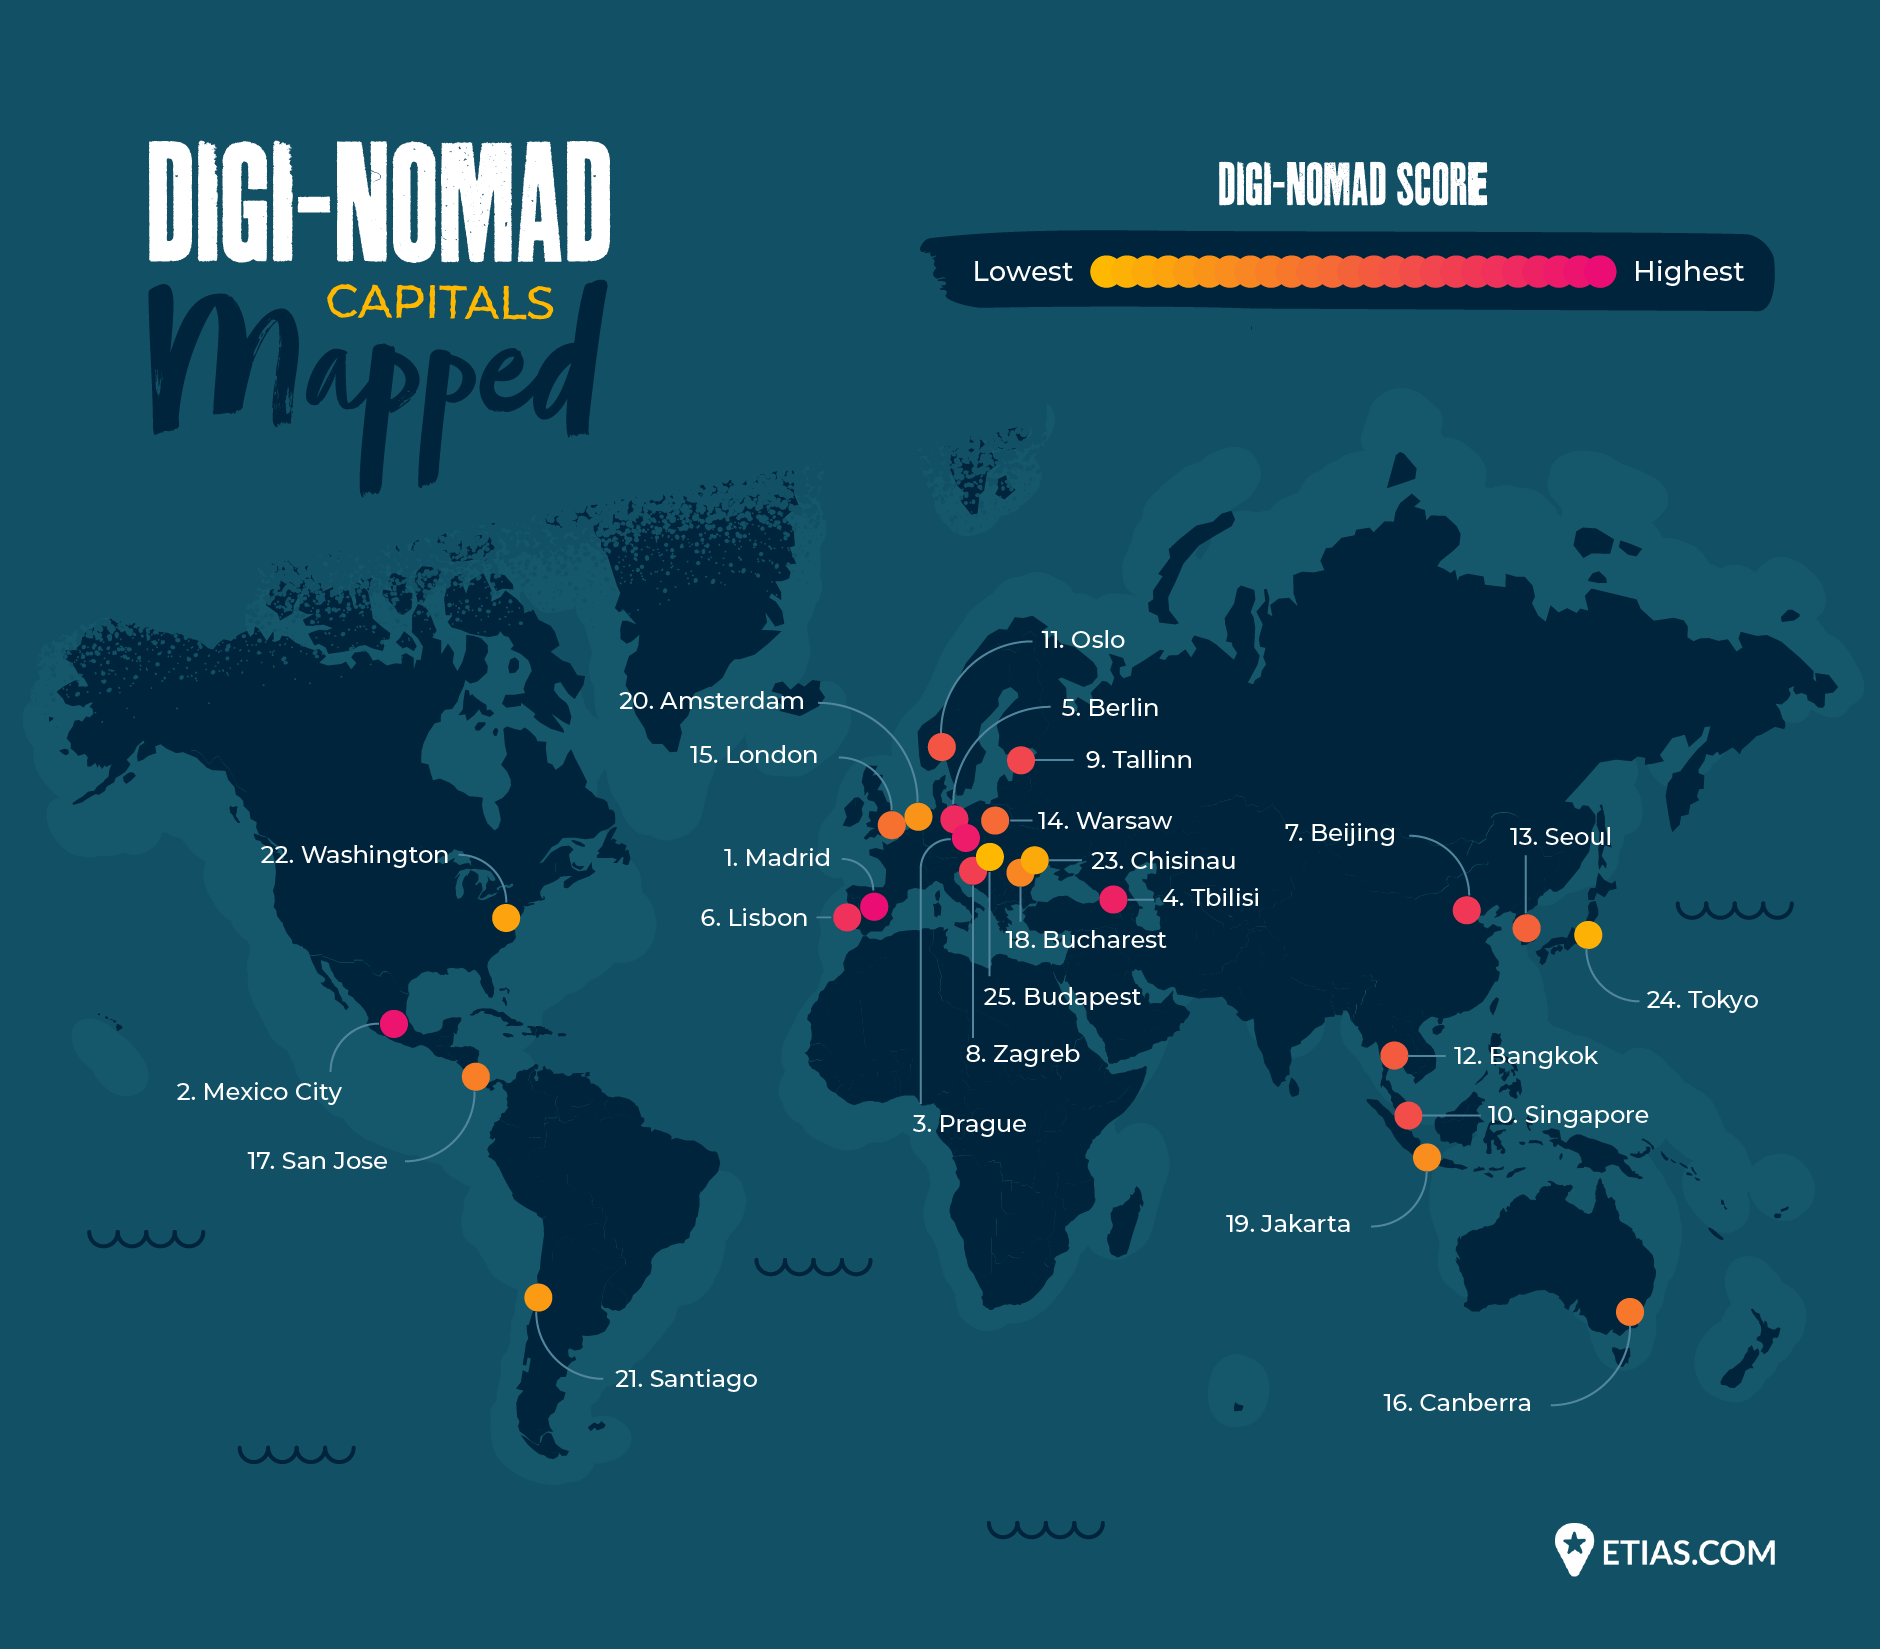 A map showing the top locations for digital nomads.